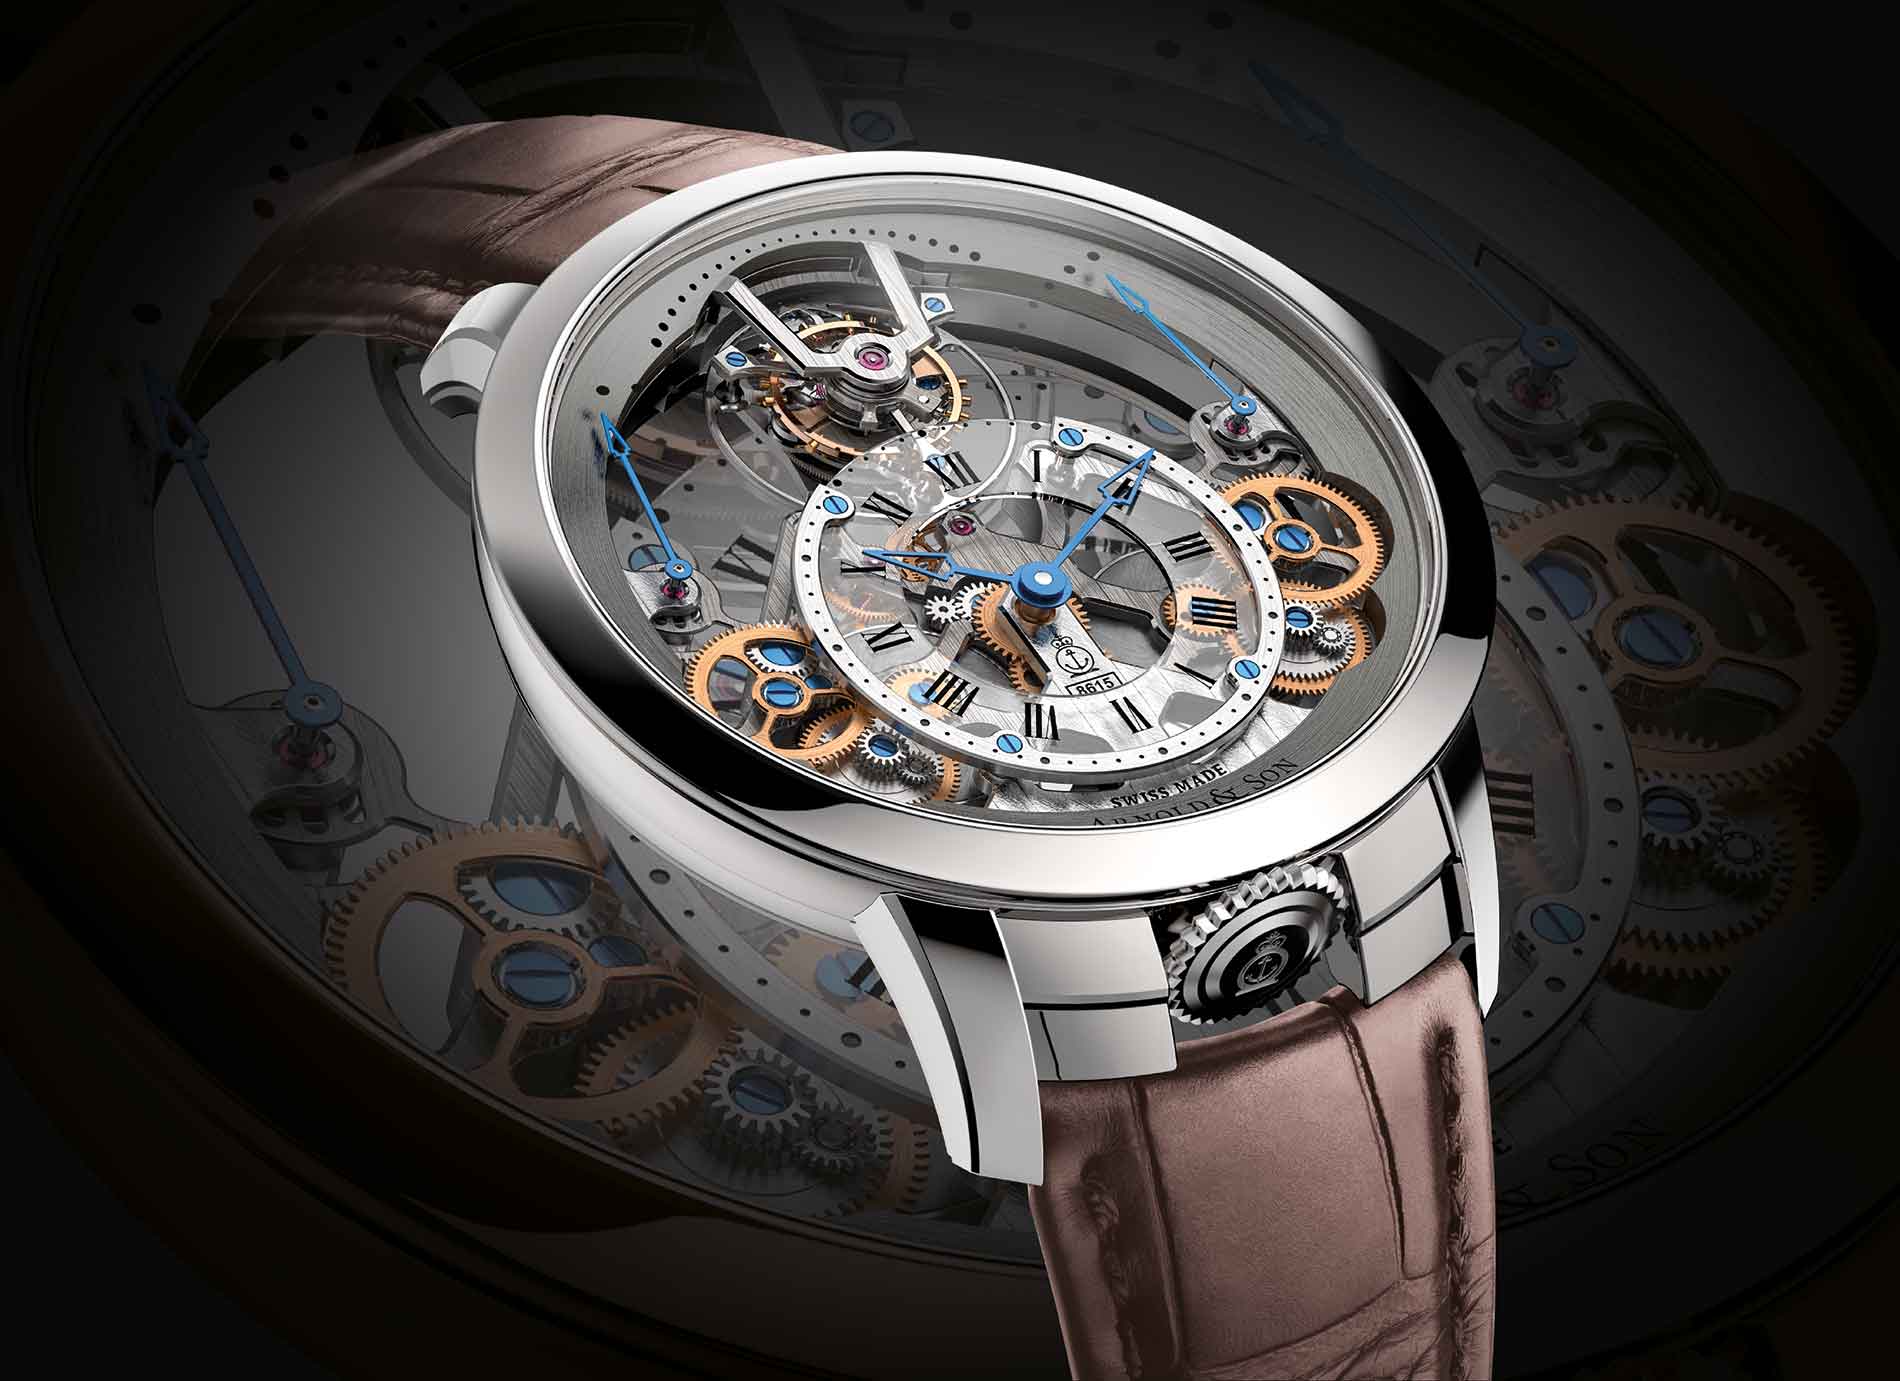 The distinguished Time Pyramid makes a brilliant comeback with a skeletonized flying tourbillon movement